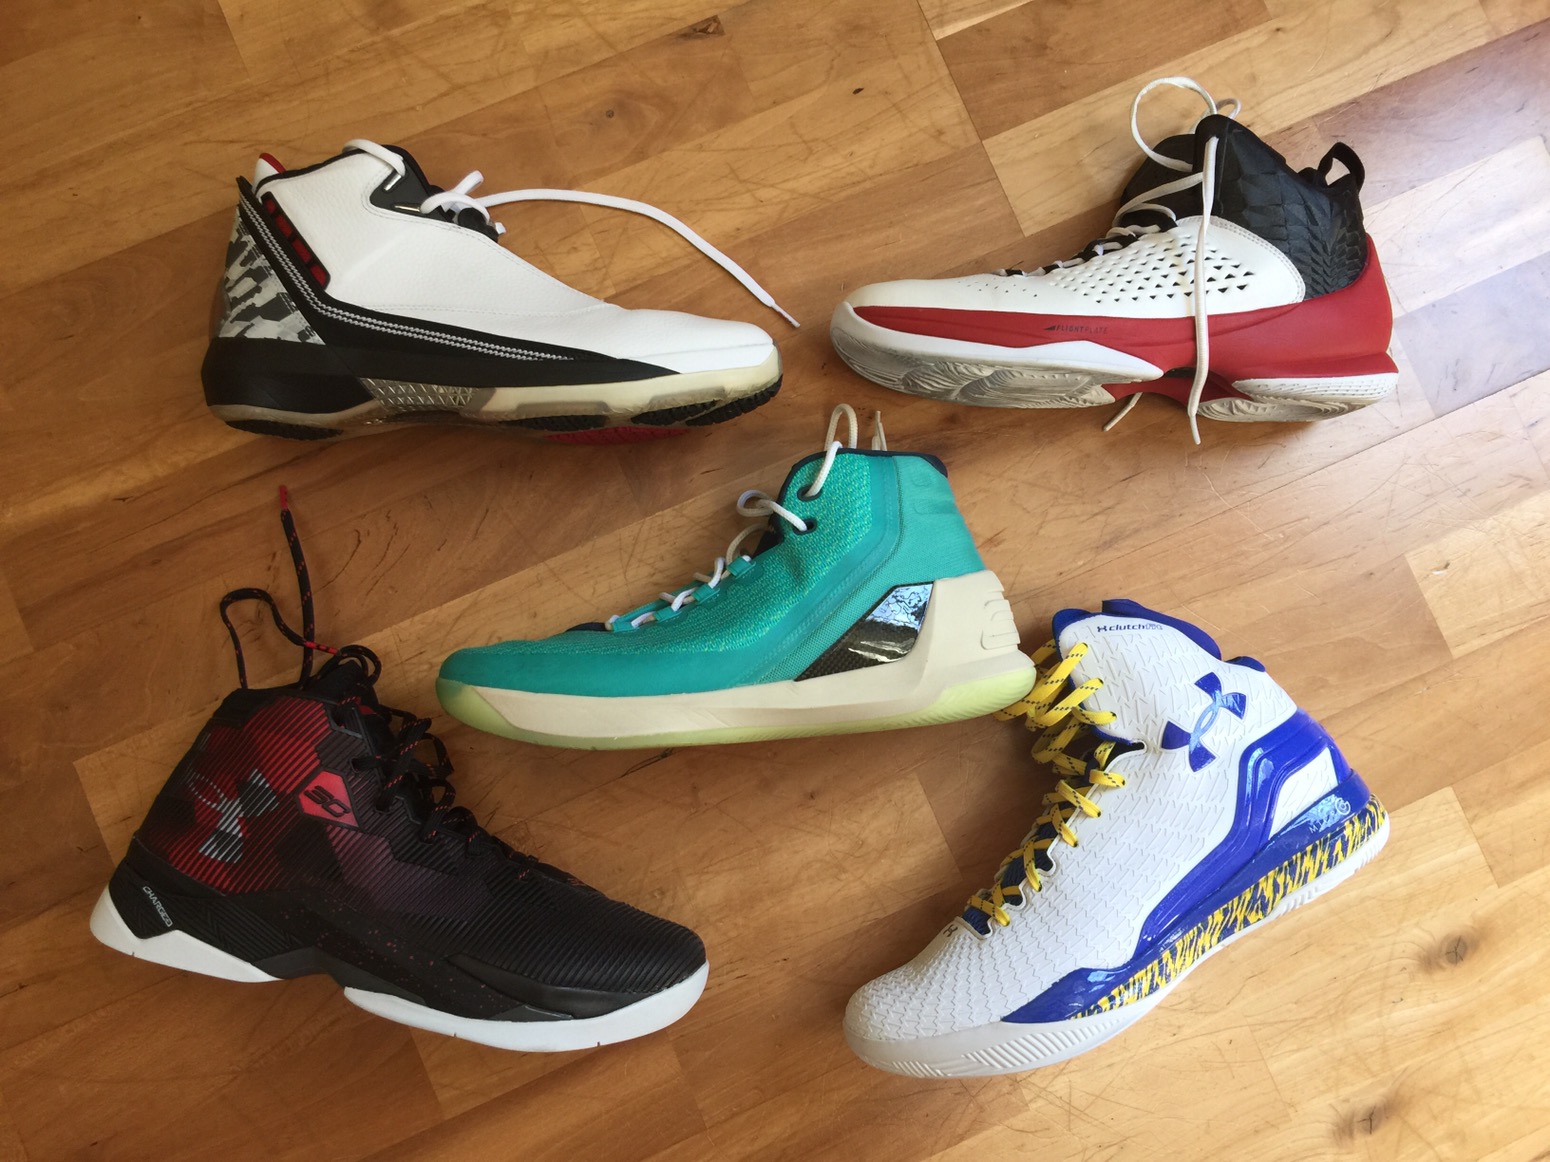 Under Armour Curry 3 Performance Review 